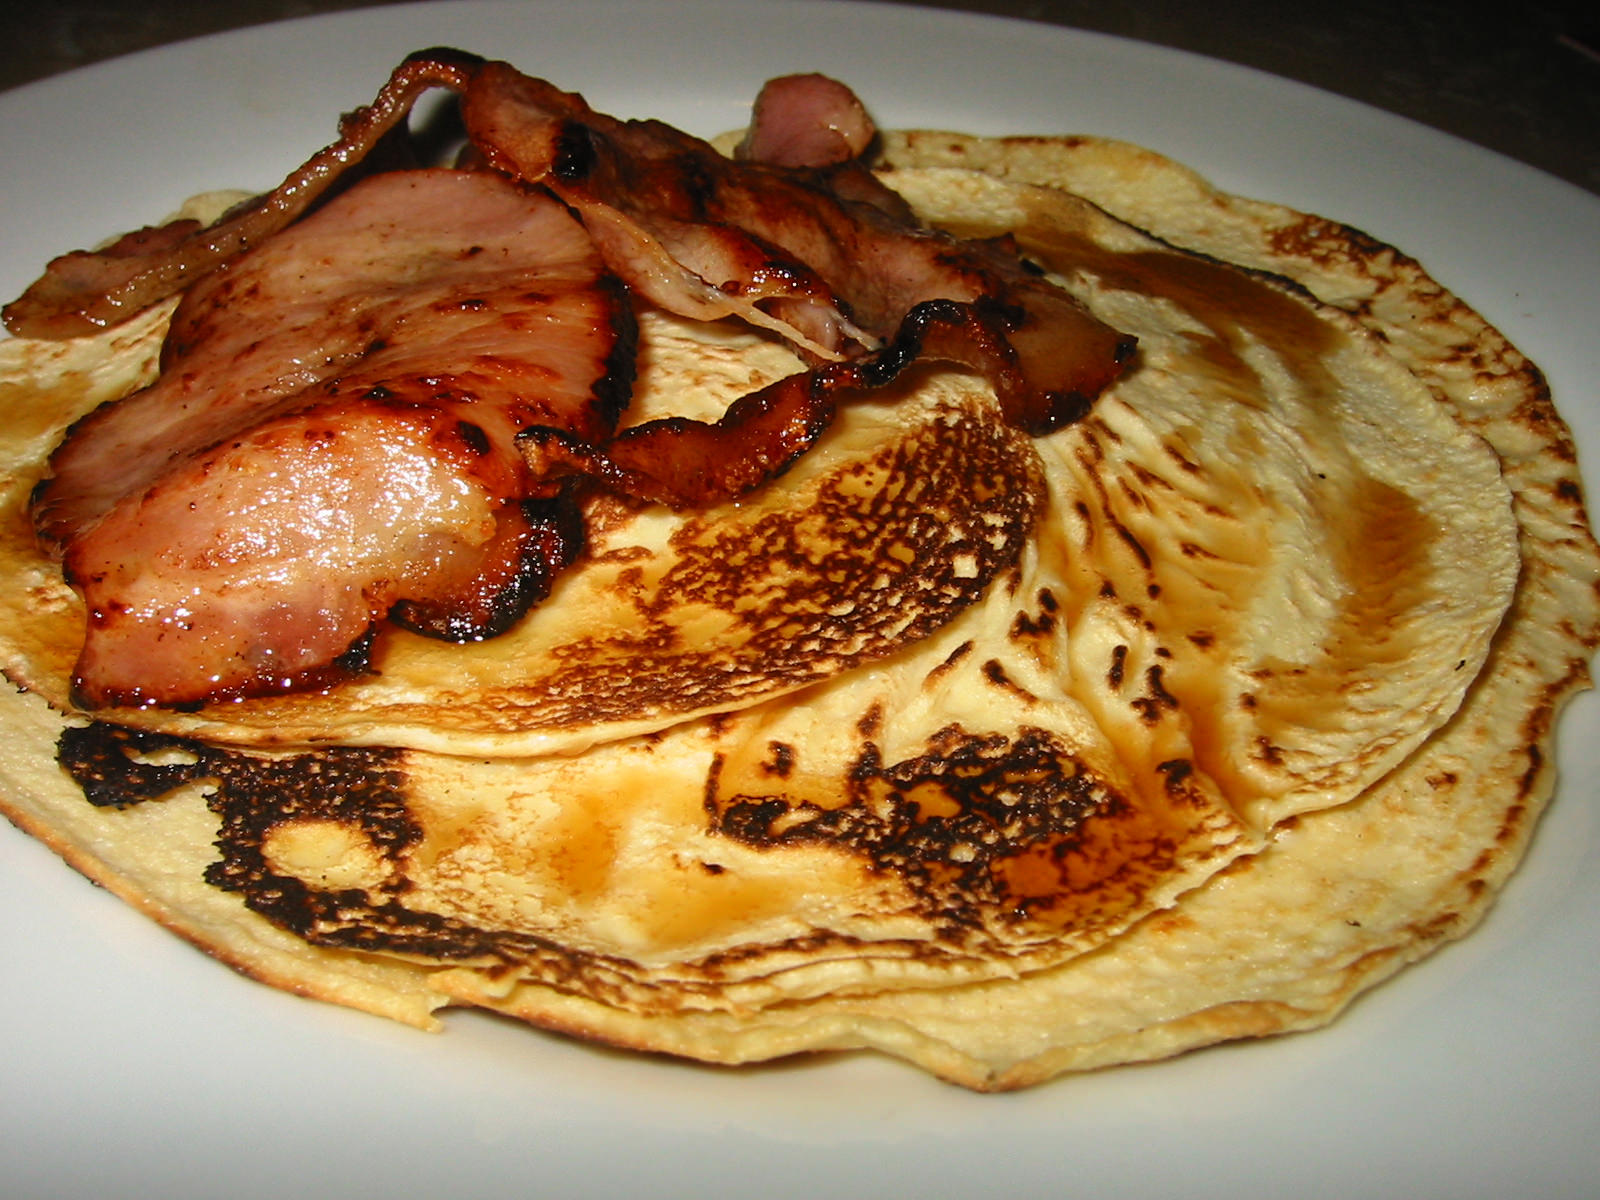 Bacon, pancakes and maple syrup